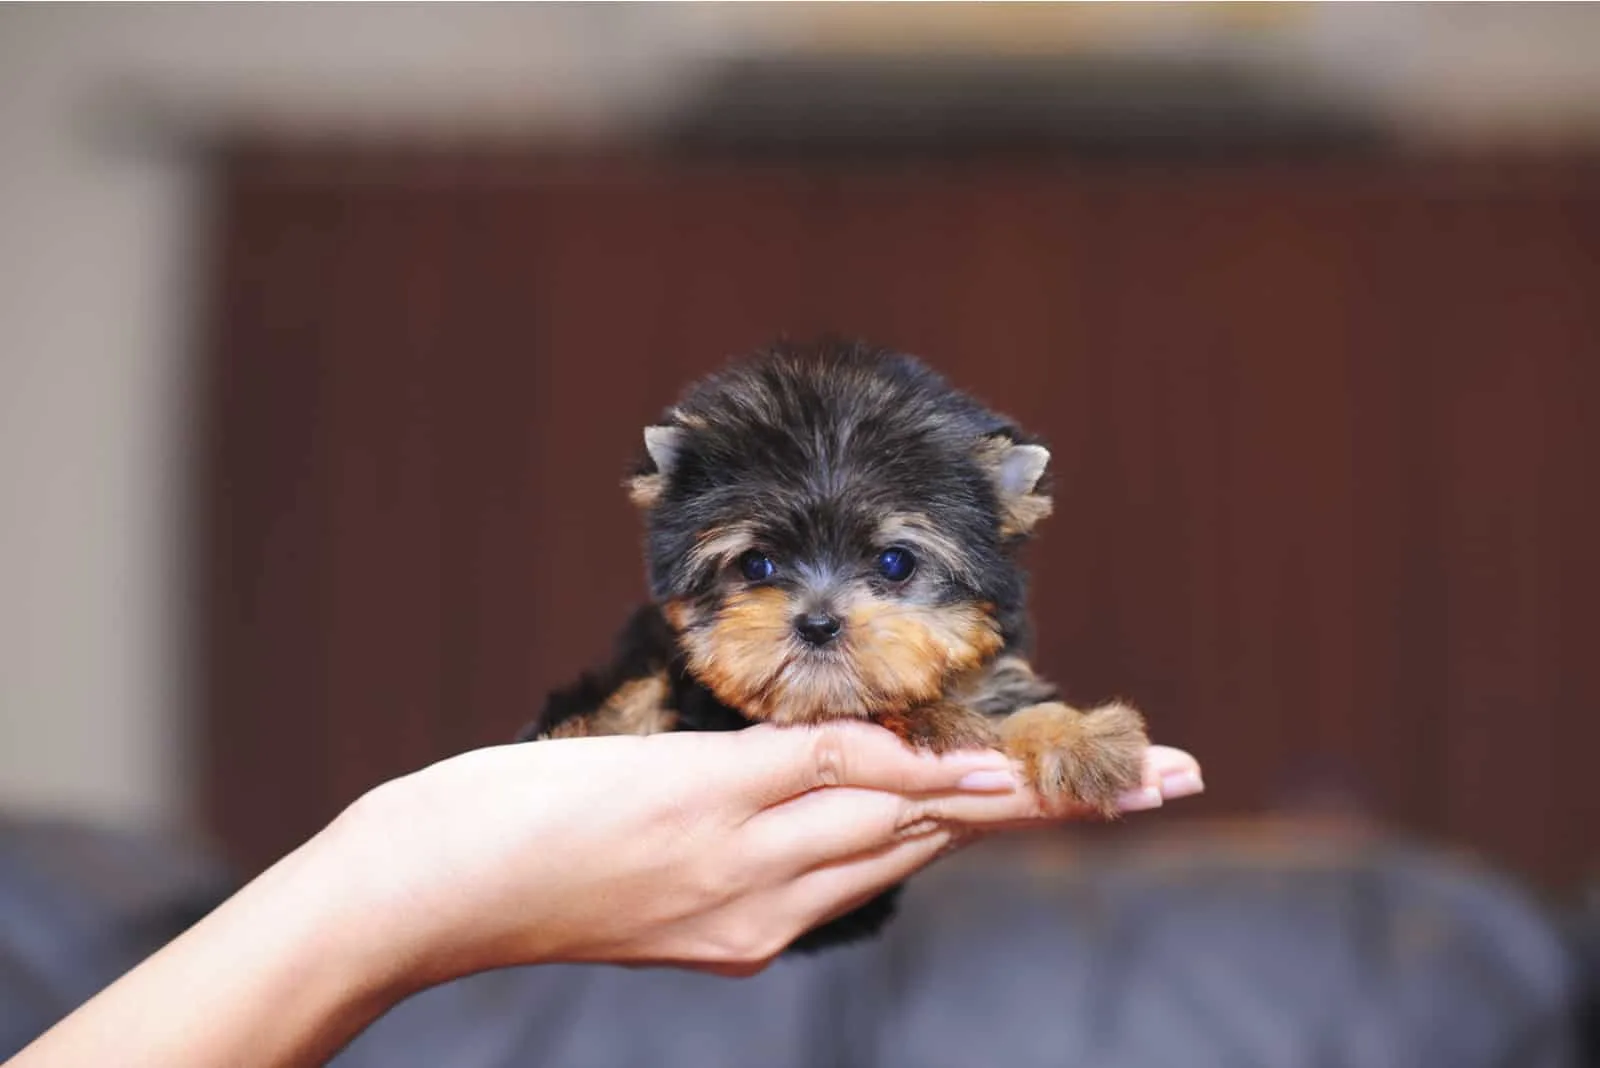 person holding a teacup yorkie